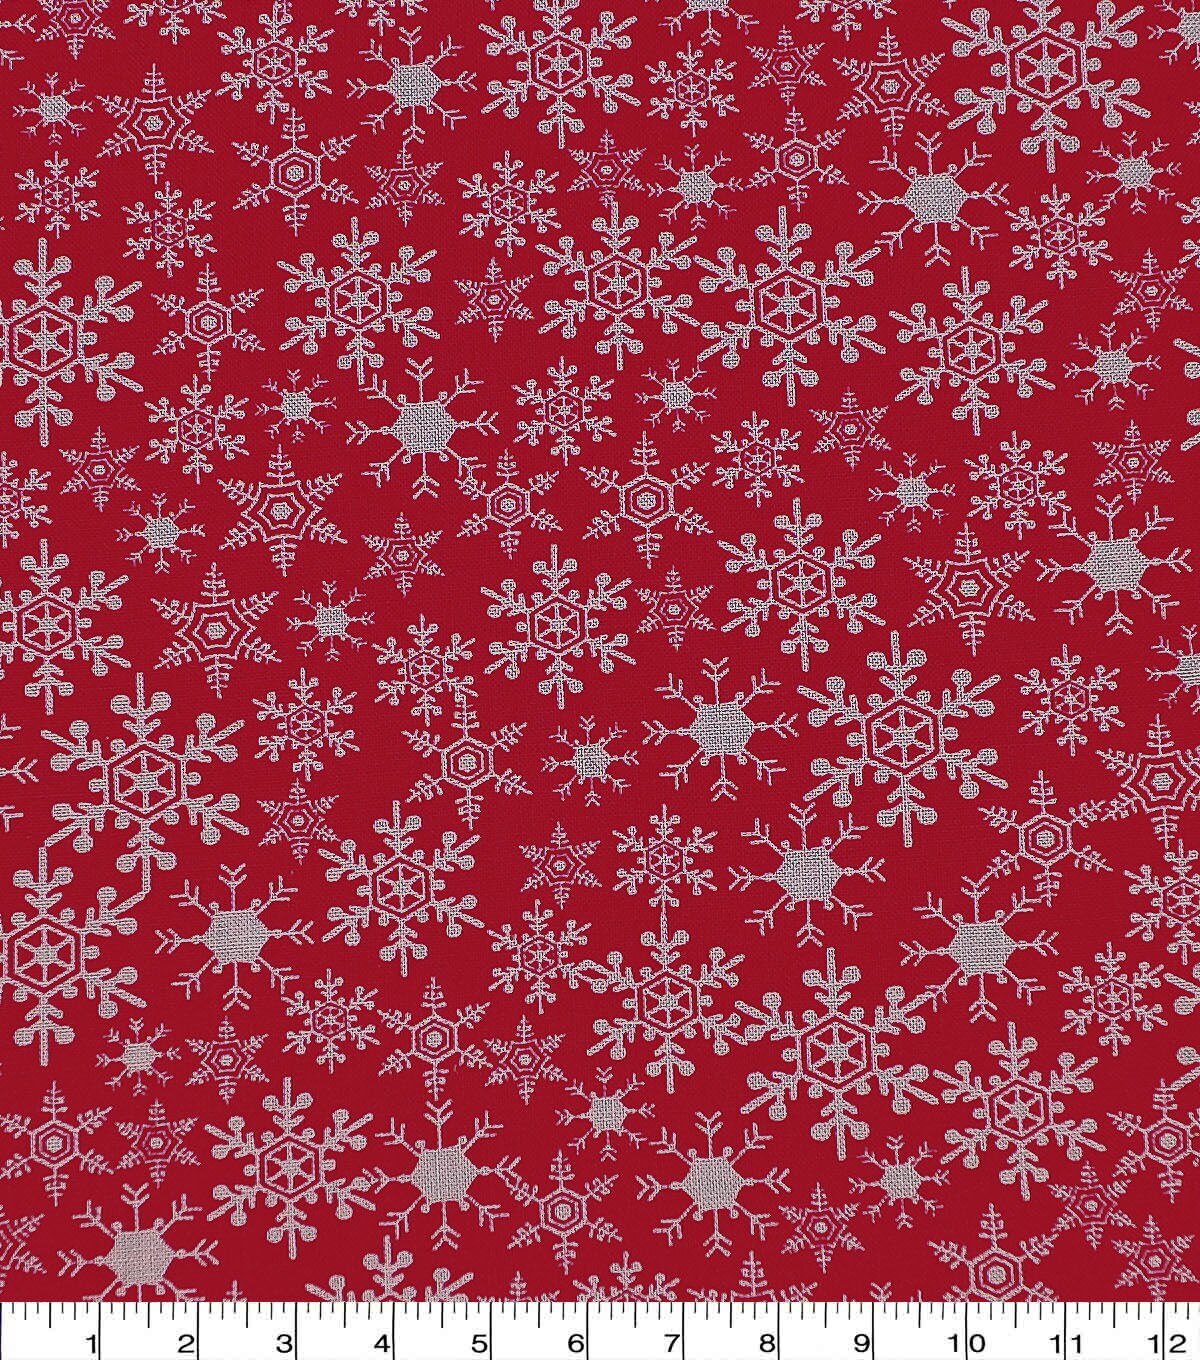 54" WIDE CHRISTMAS BRIGHT WHITE SNOWFLAKES ON RED COTTON BLEND FABRIC 